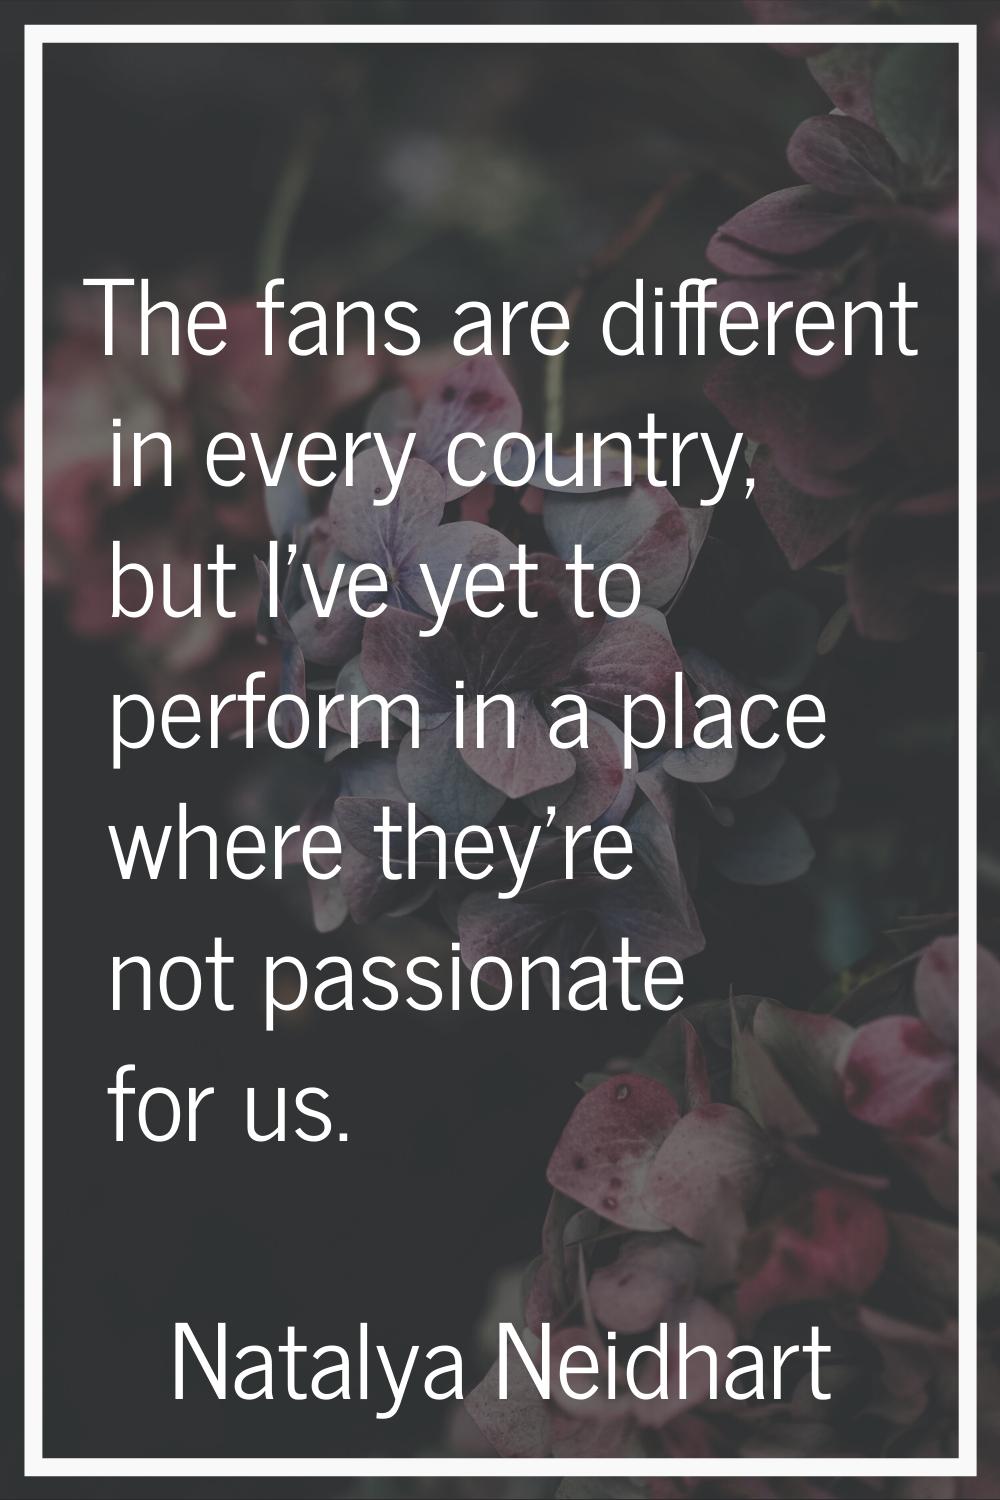 The fans are different in every country, but I've yet to perform in a place where they're not passi